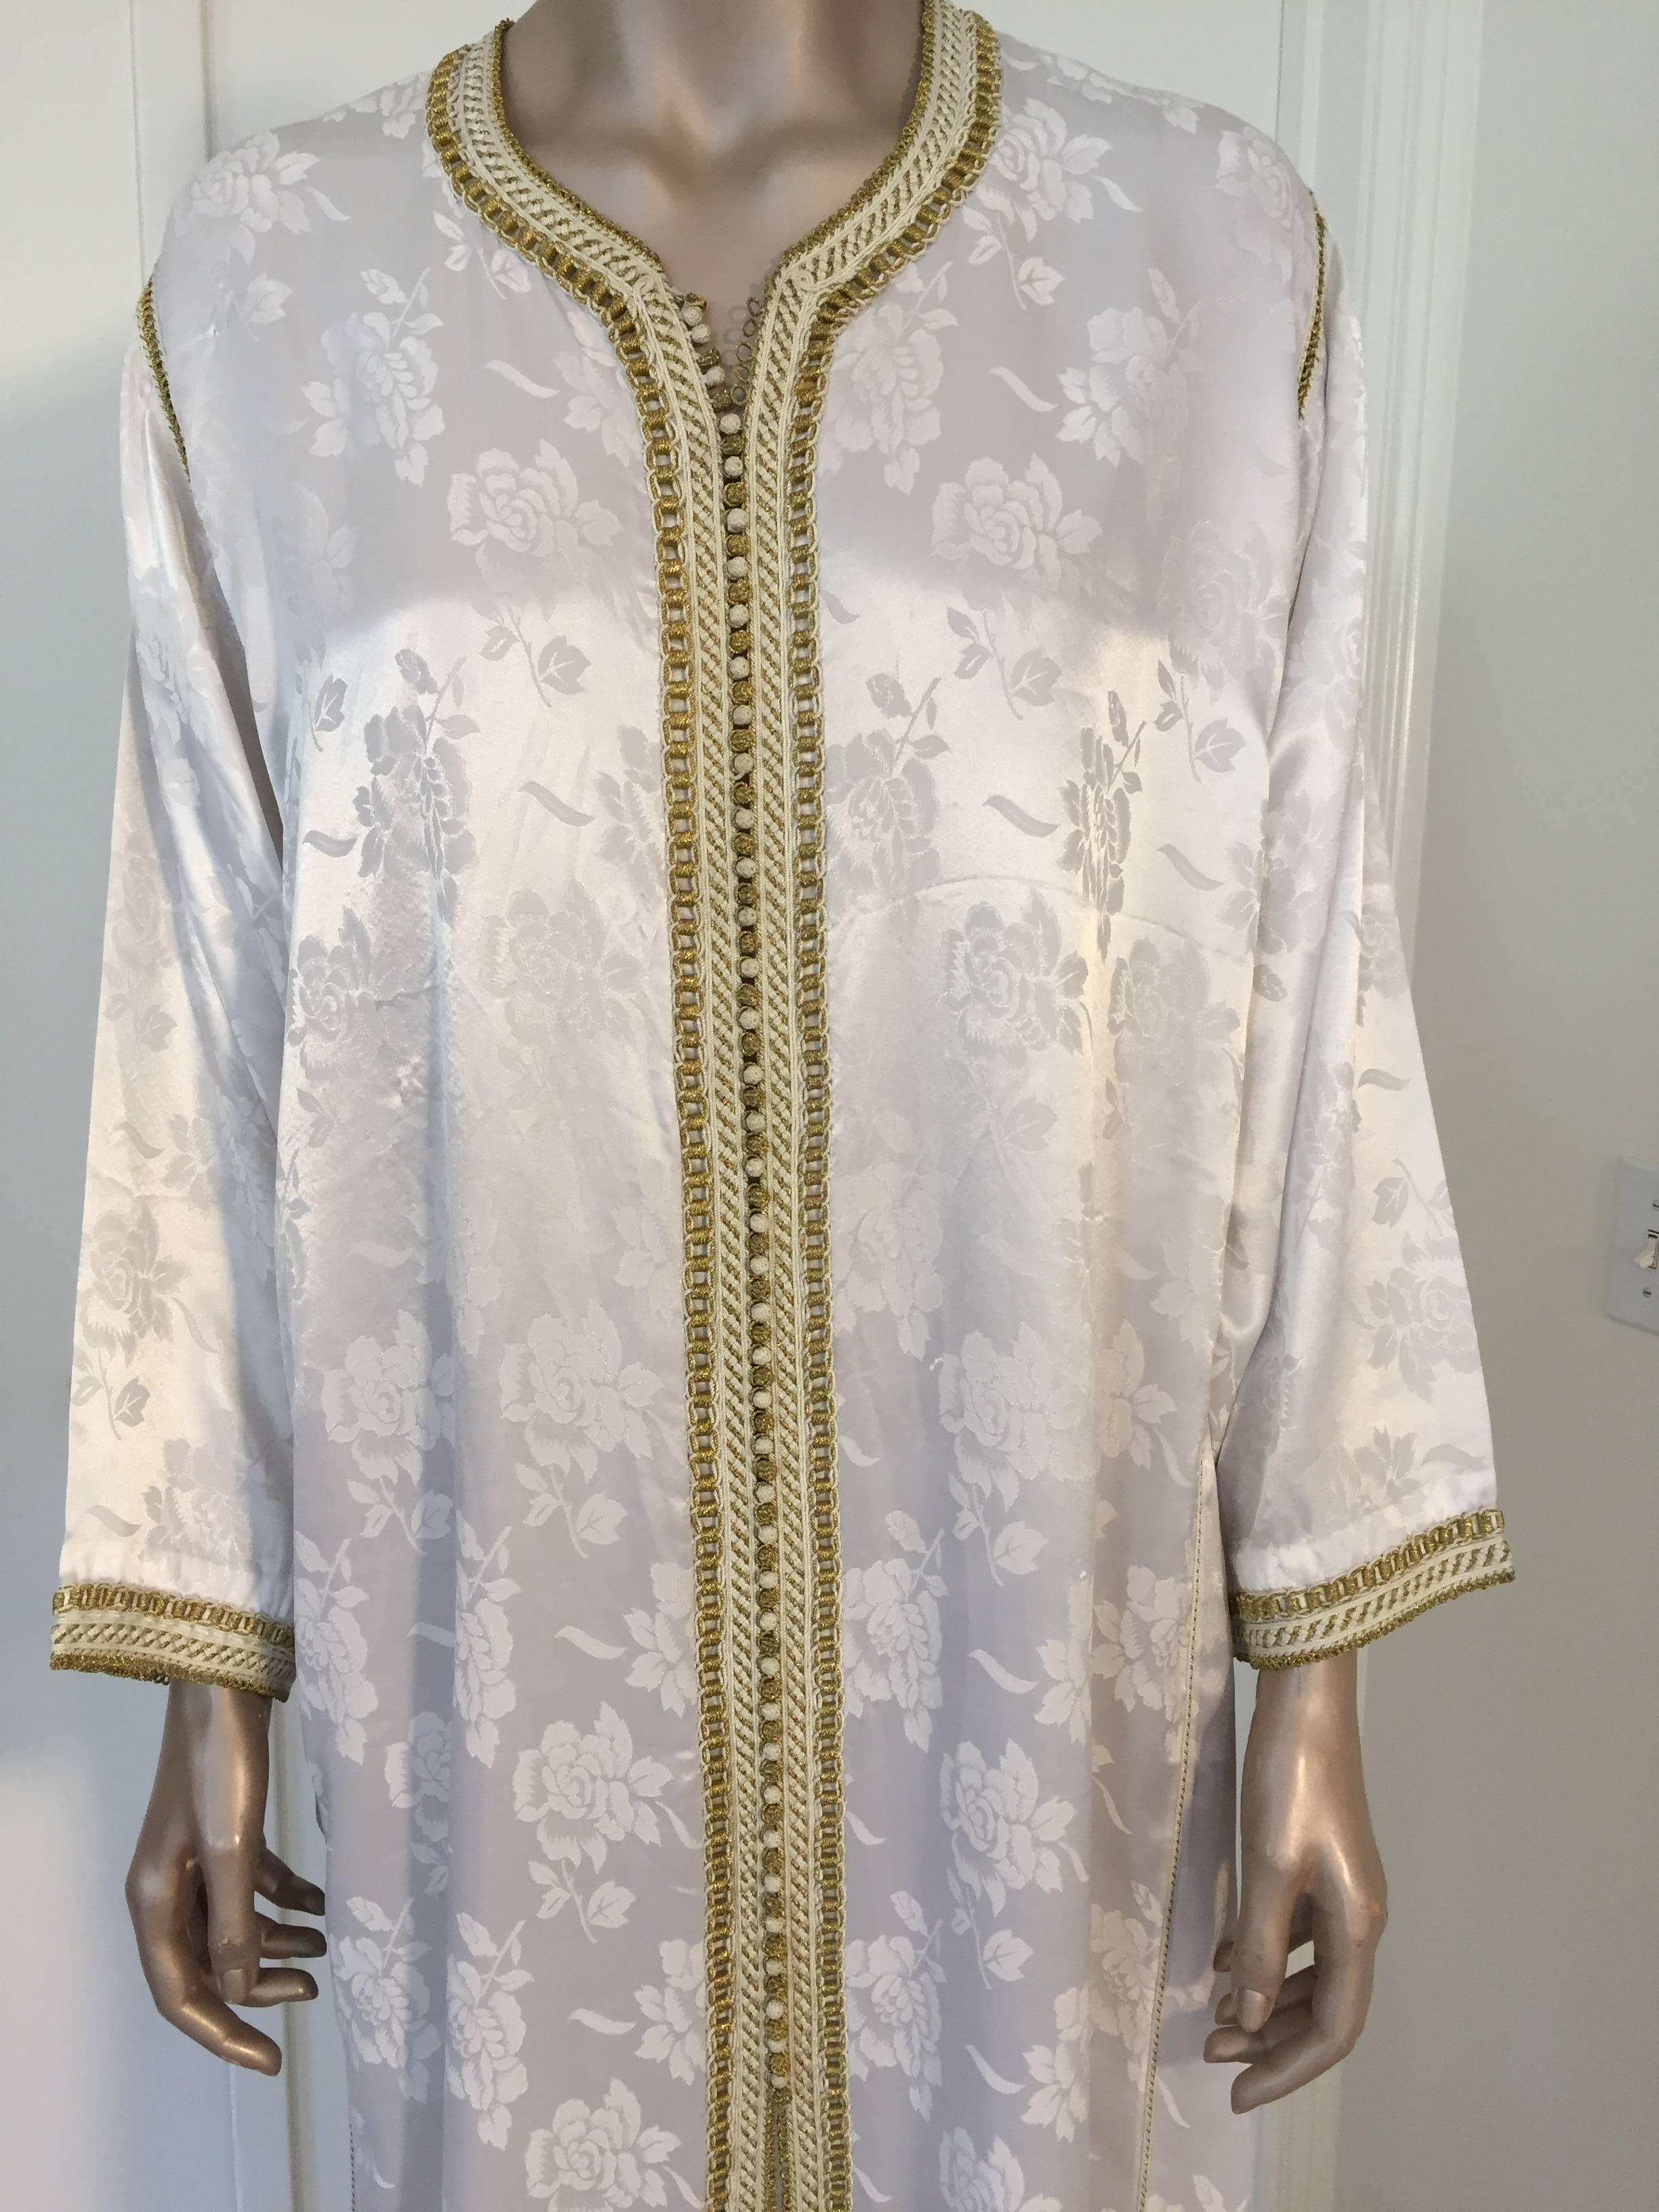 Moroccan Caftan Gown White Embroidered with Gold Trim, circa 1970 In Good Condition For Sale In North Hollywood, CA